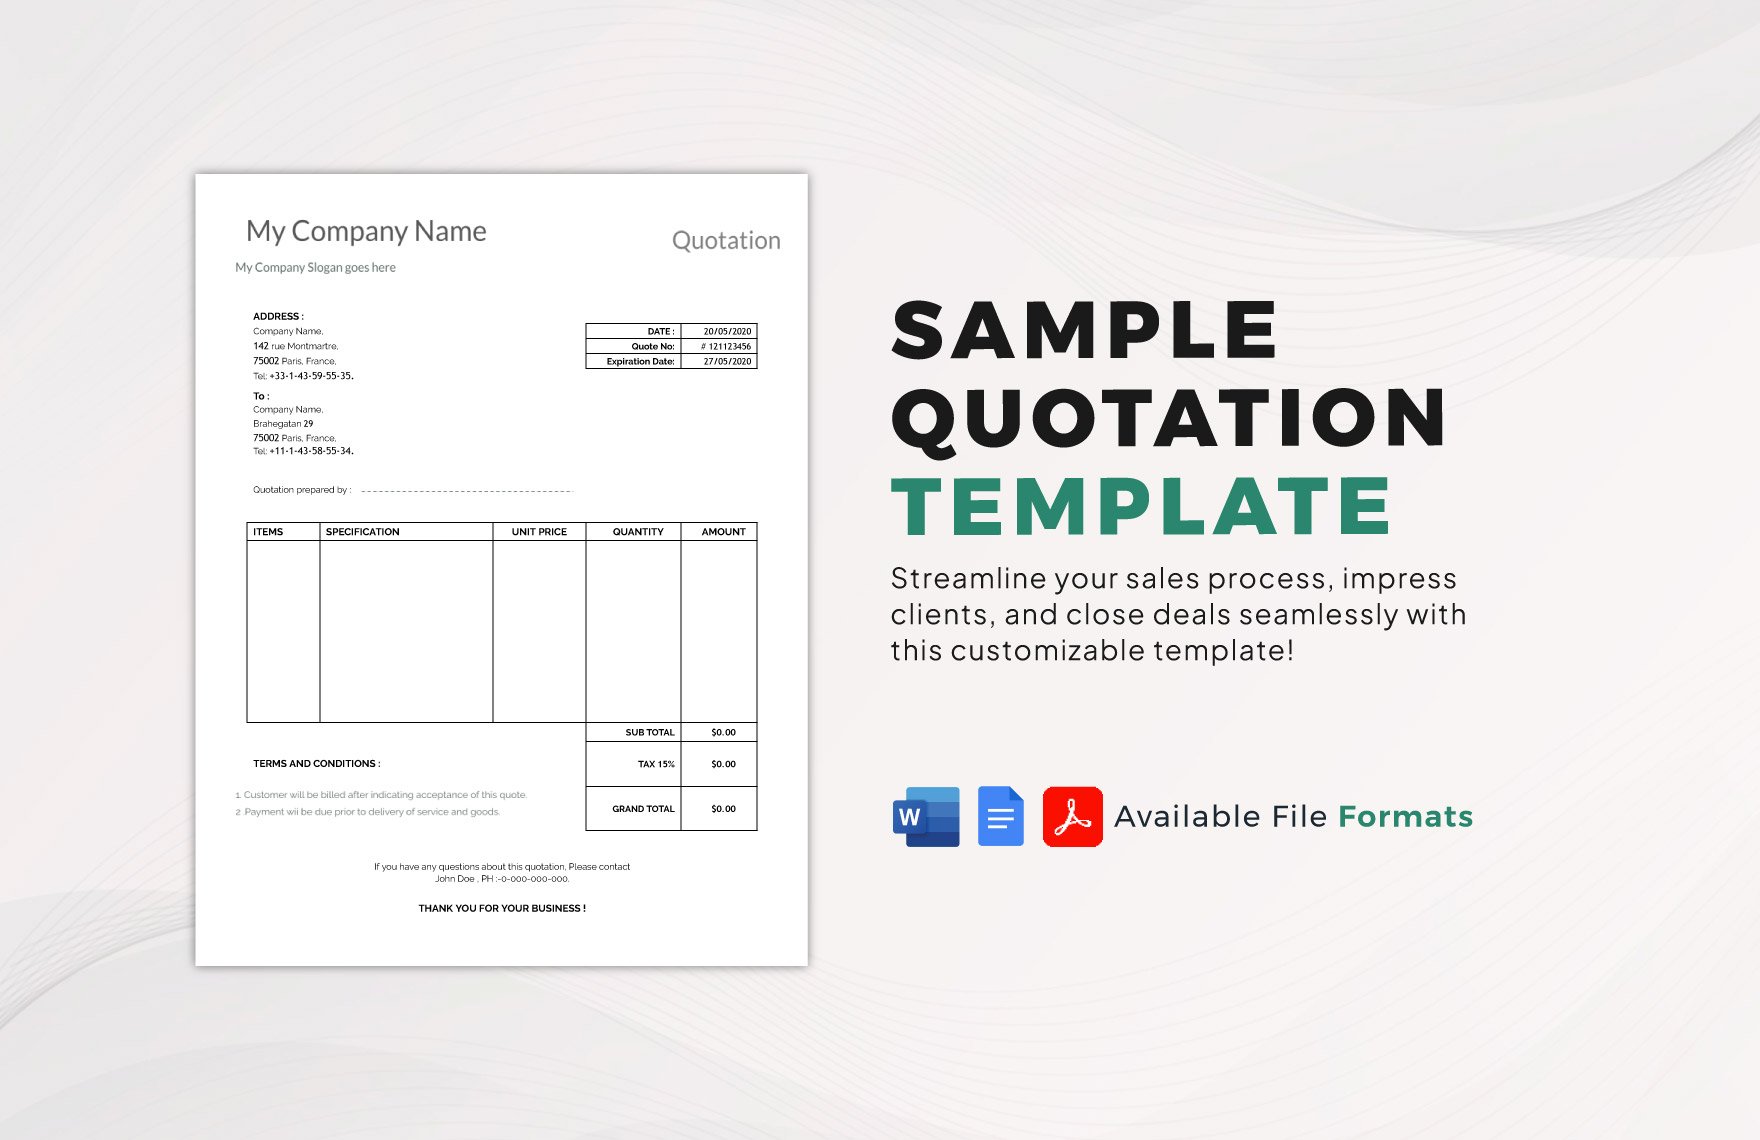 Sample Quotation Template